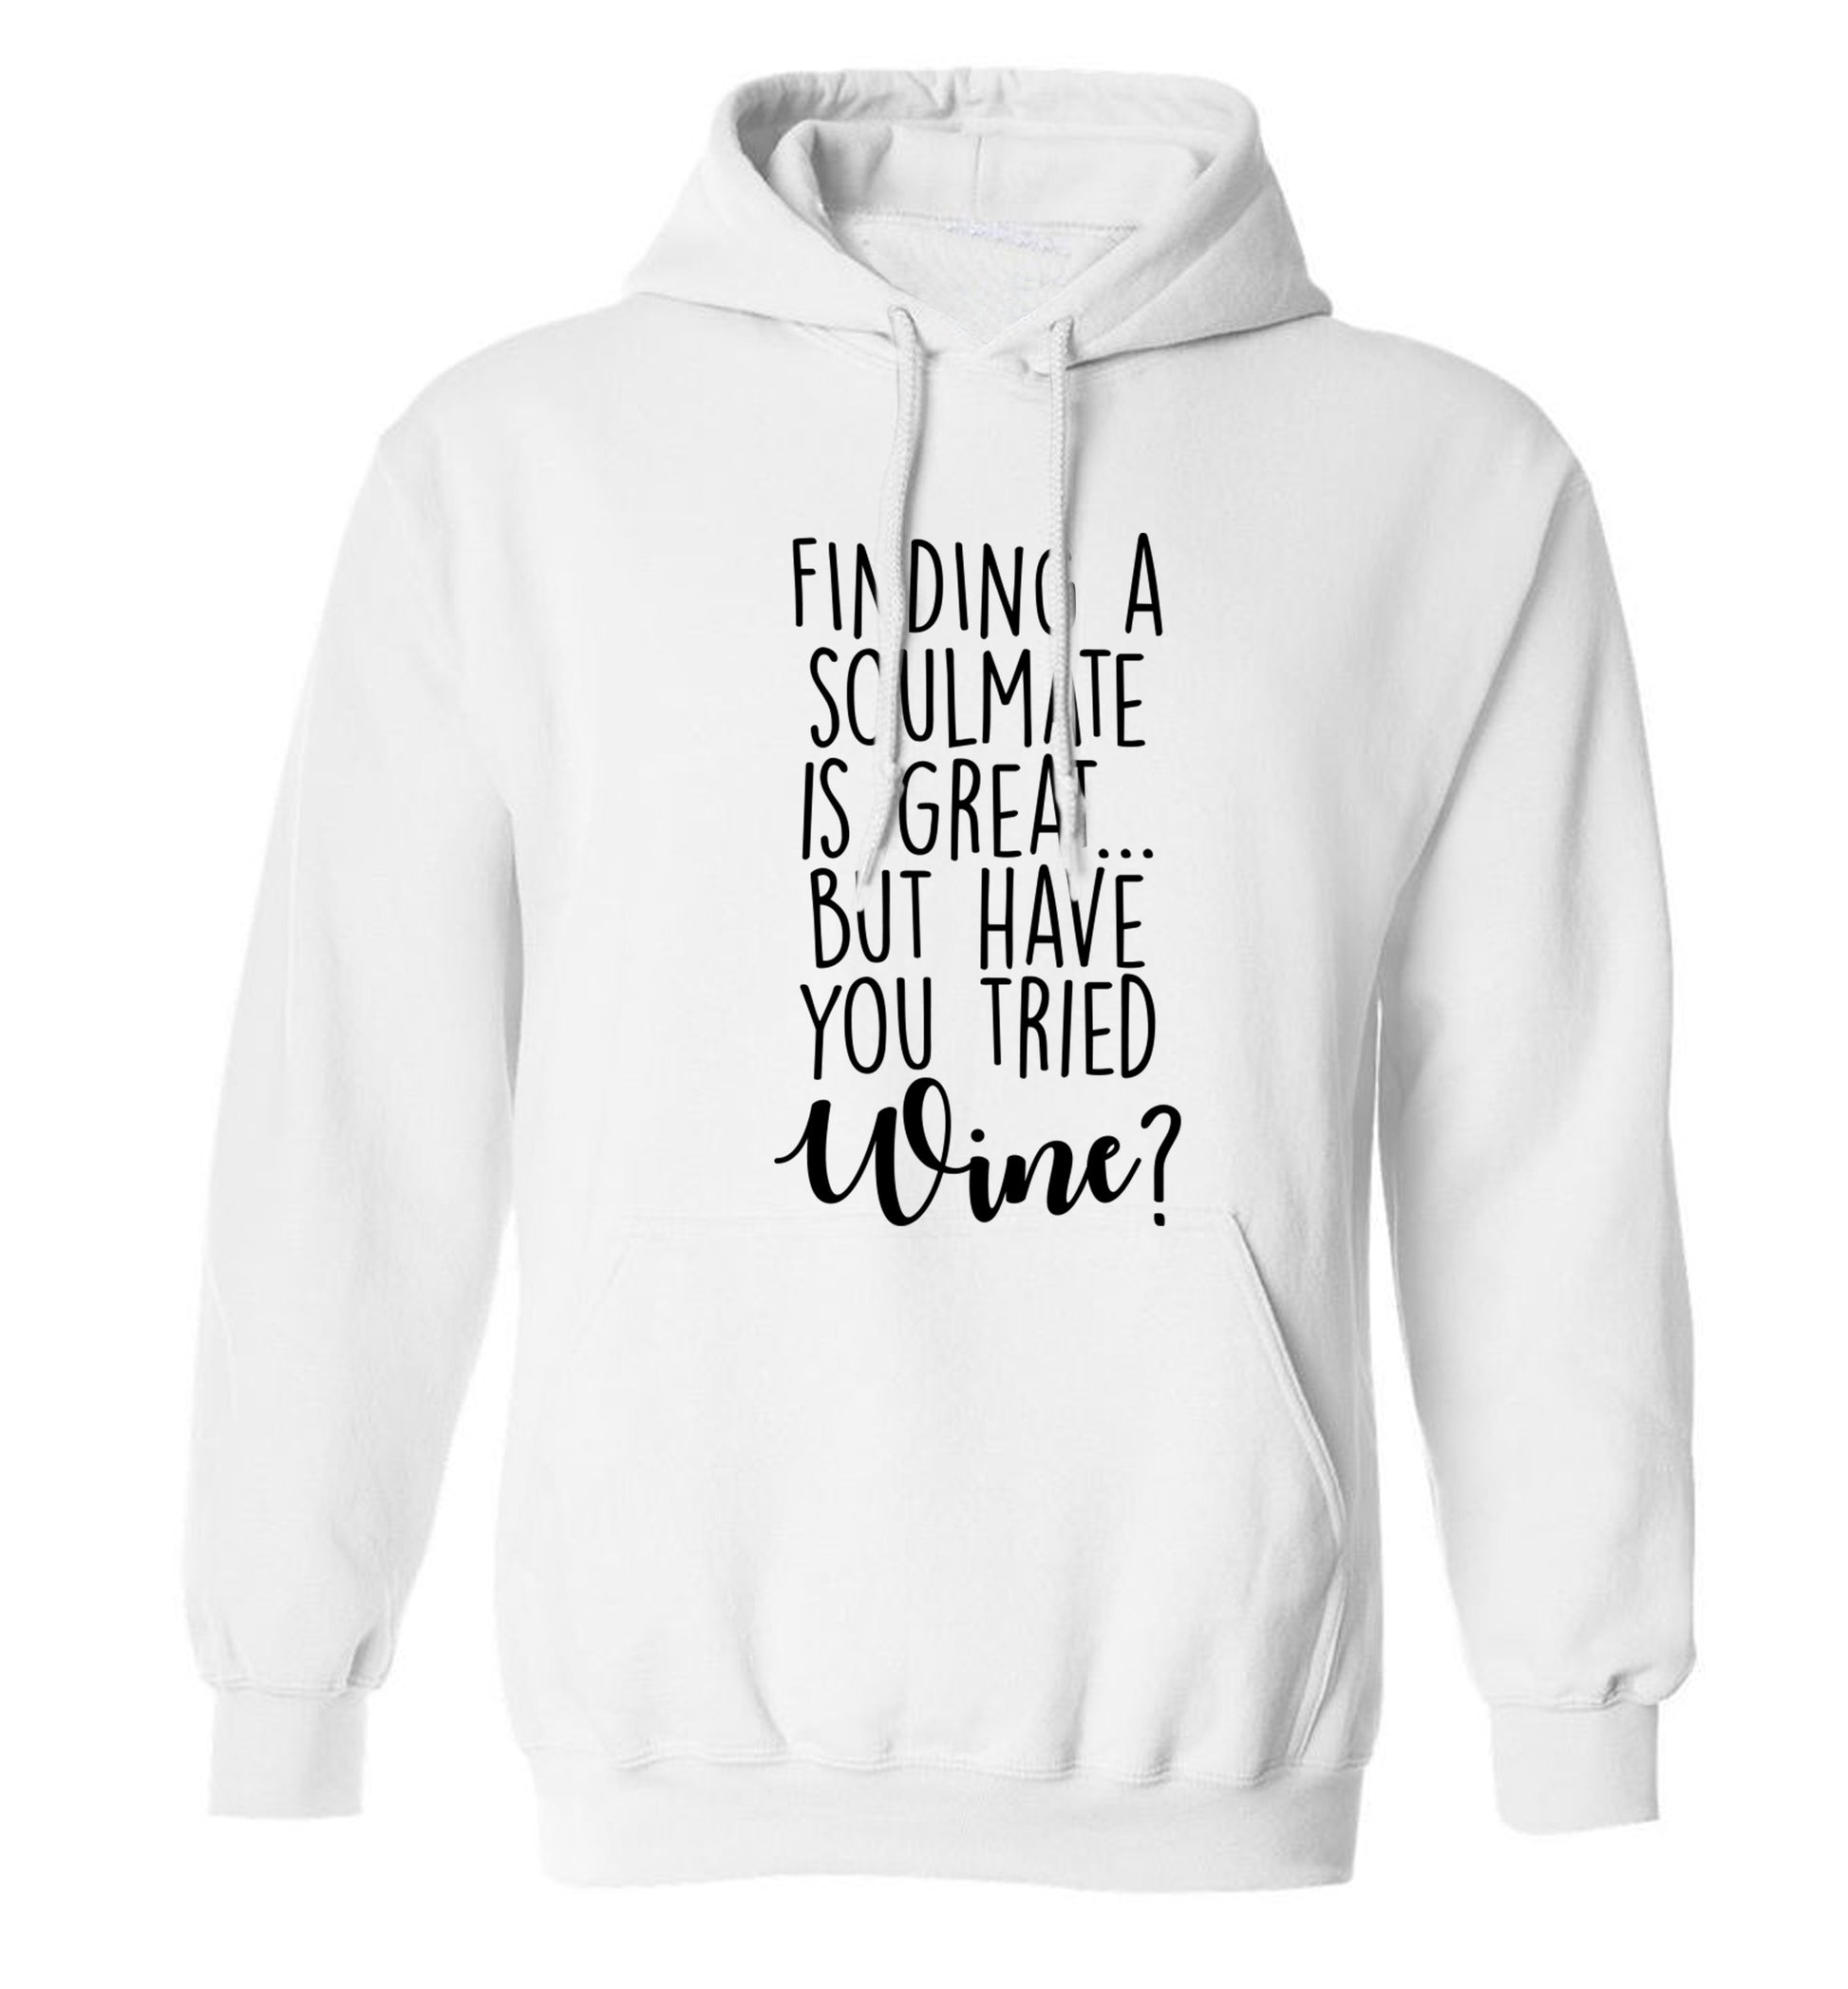 Finding a soulmate is great but have you tried wine? adults unisex white hoodie 2XL